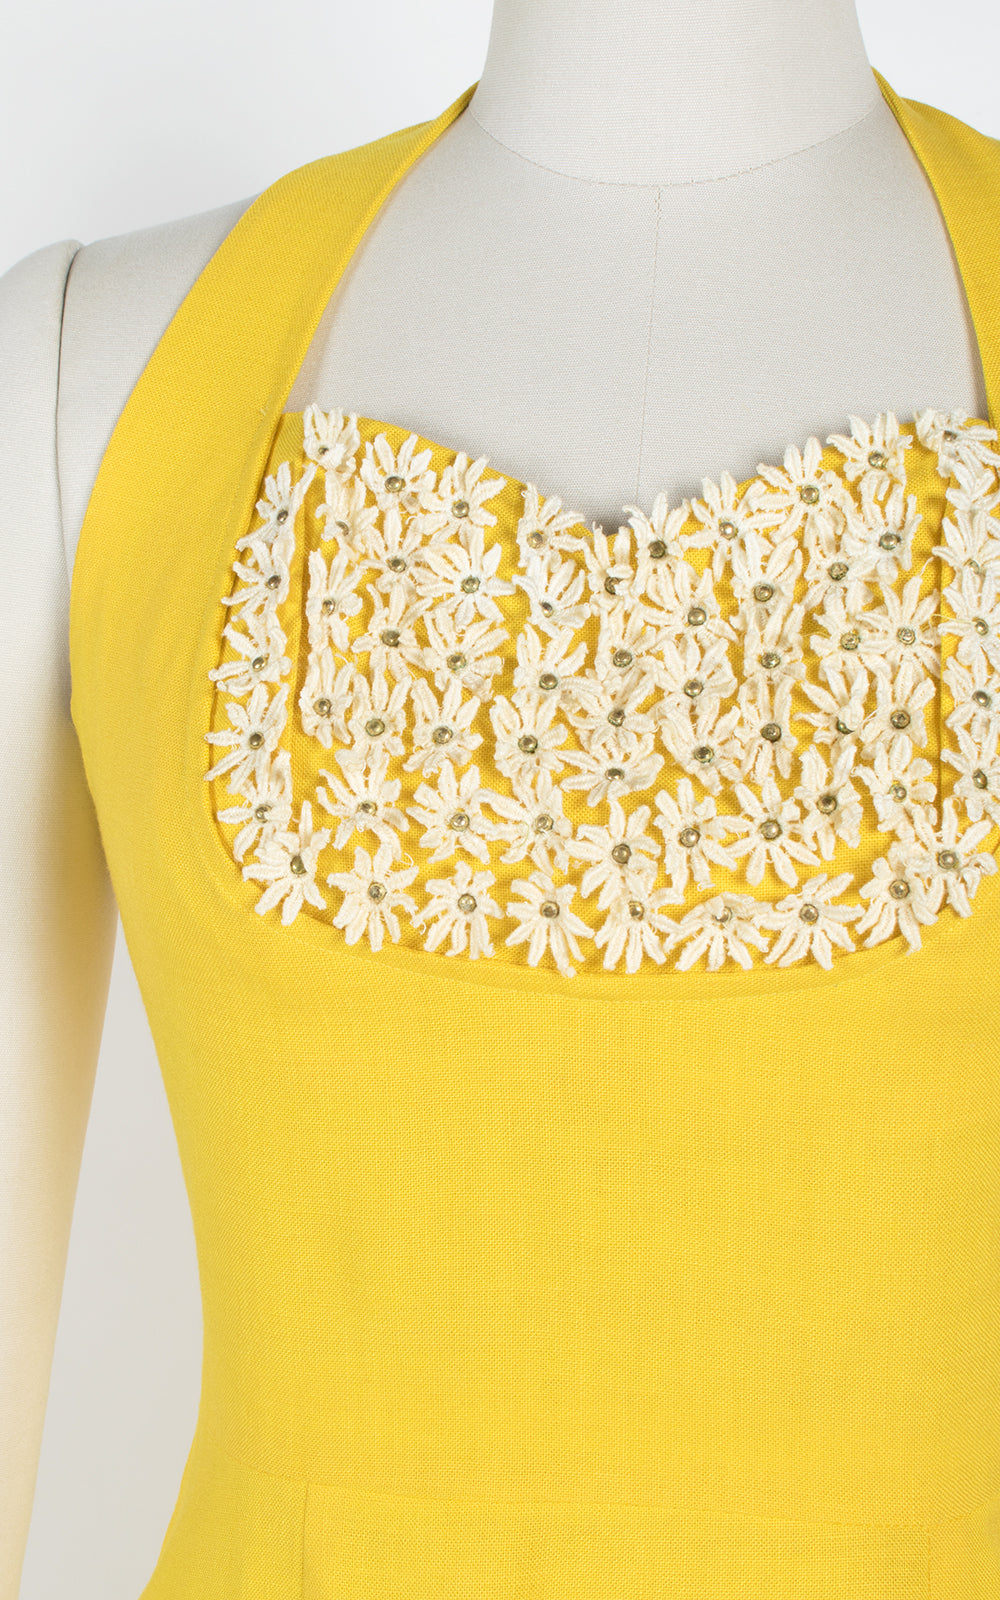 1950s Canary Yellow Linen Halter Dress with Flowers